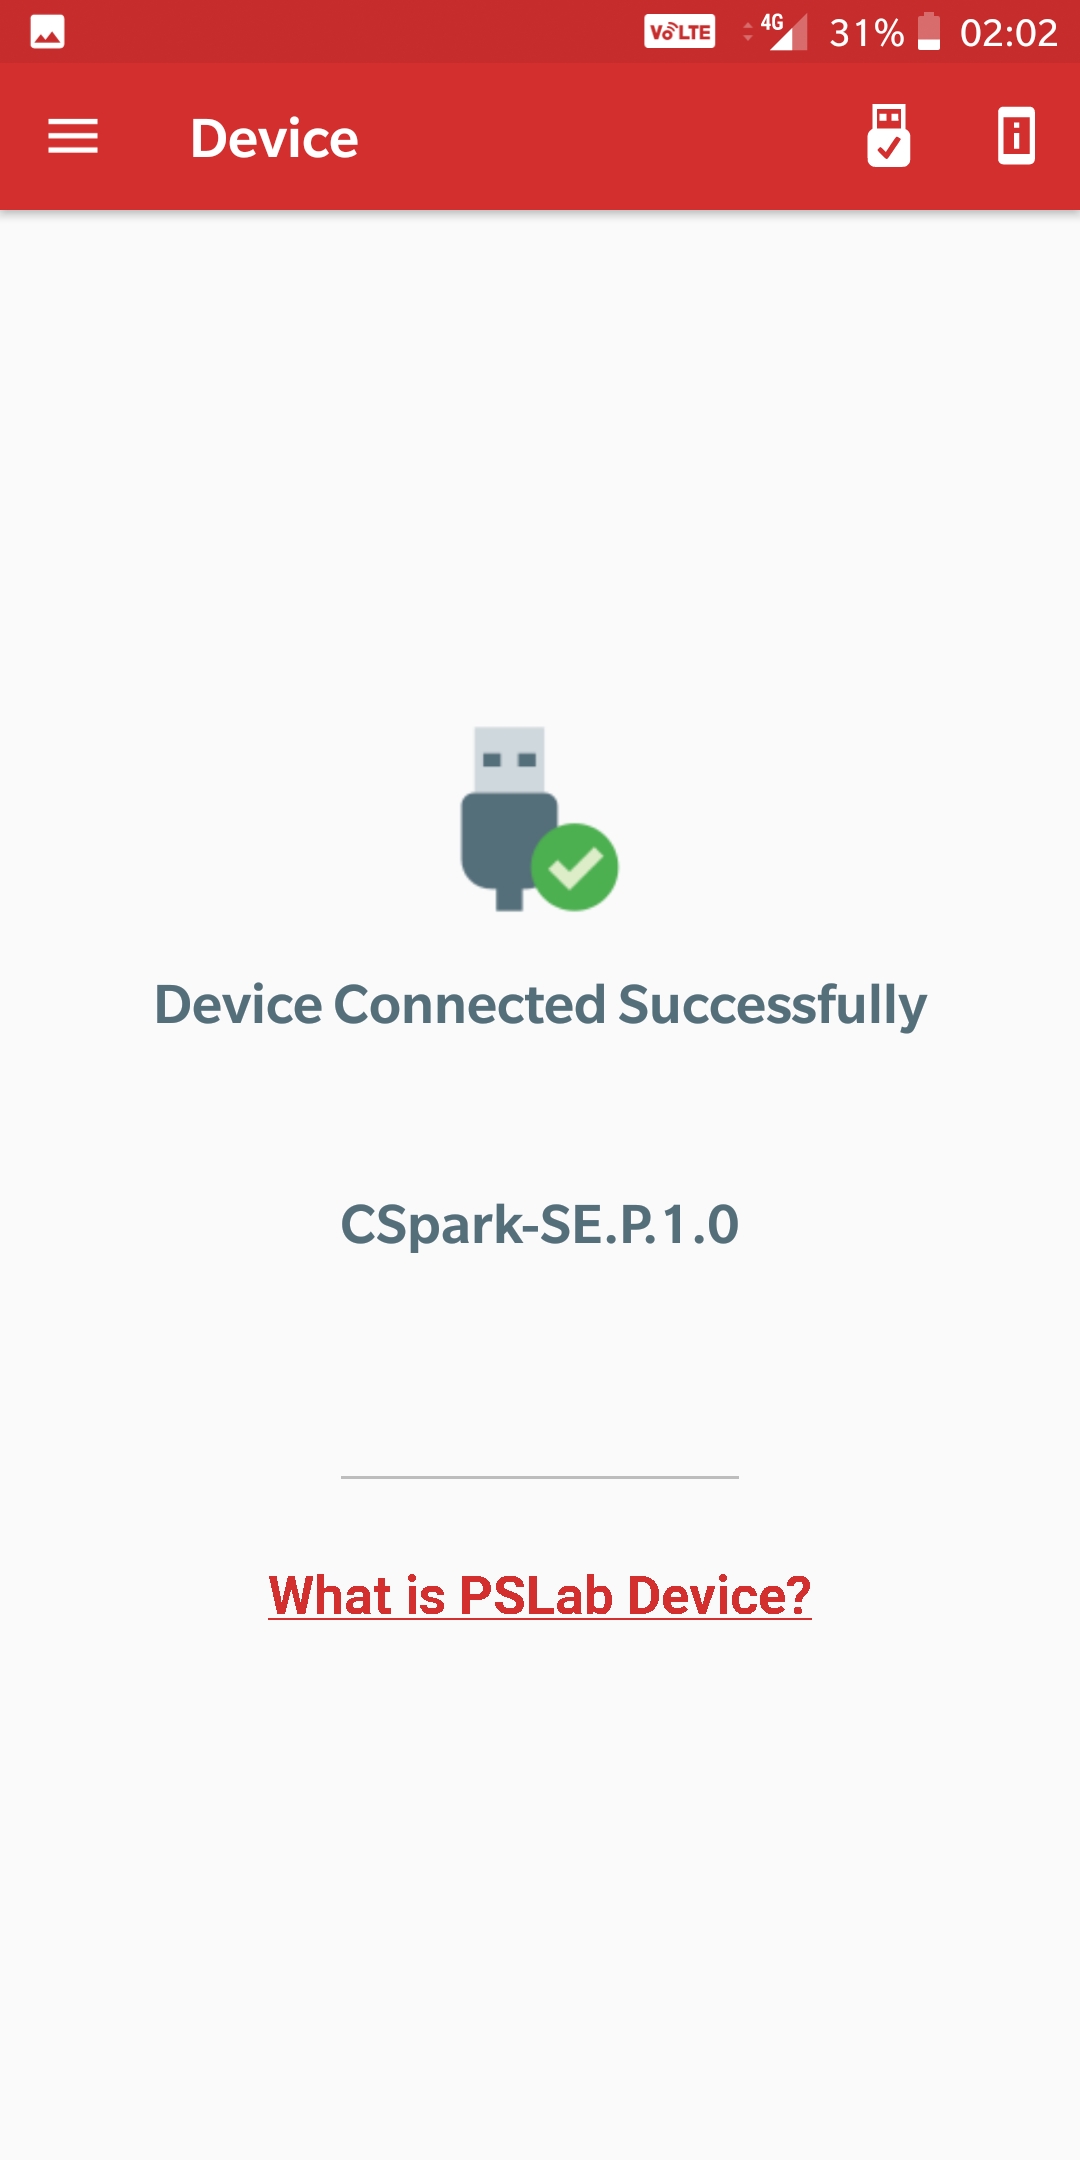 Device Connected